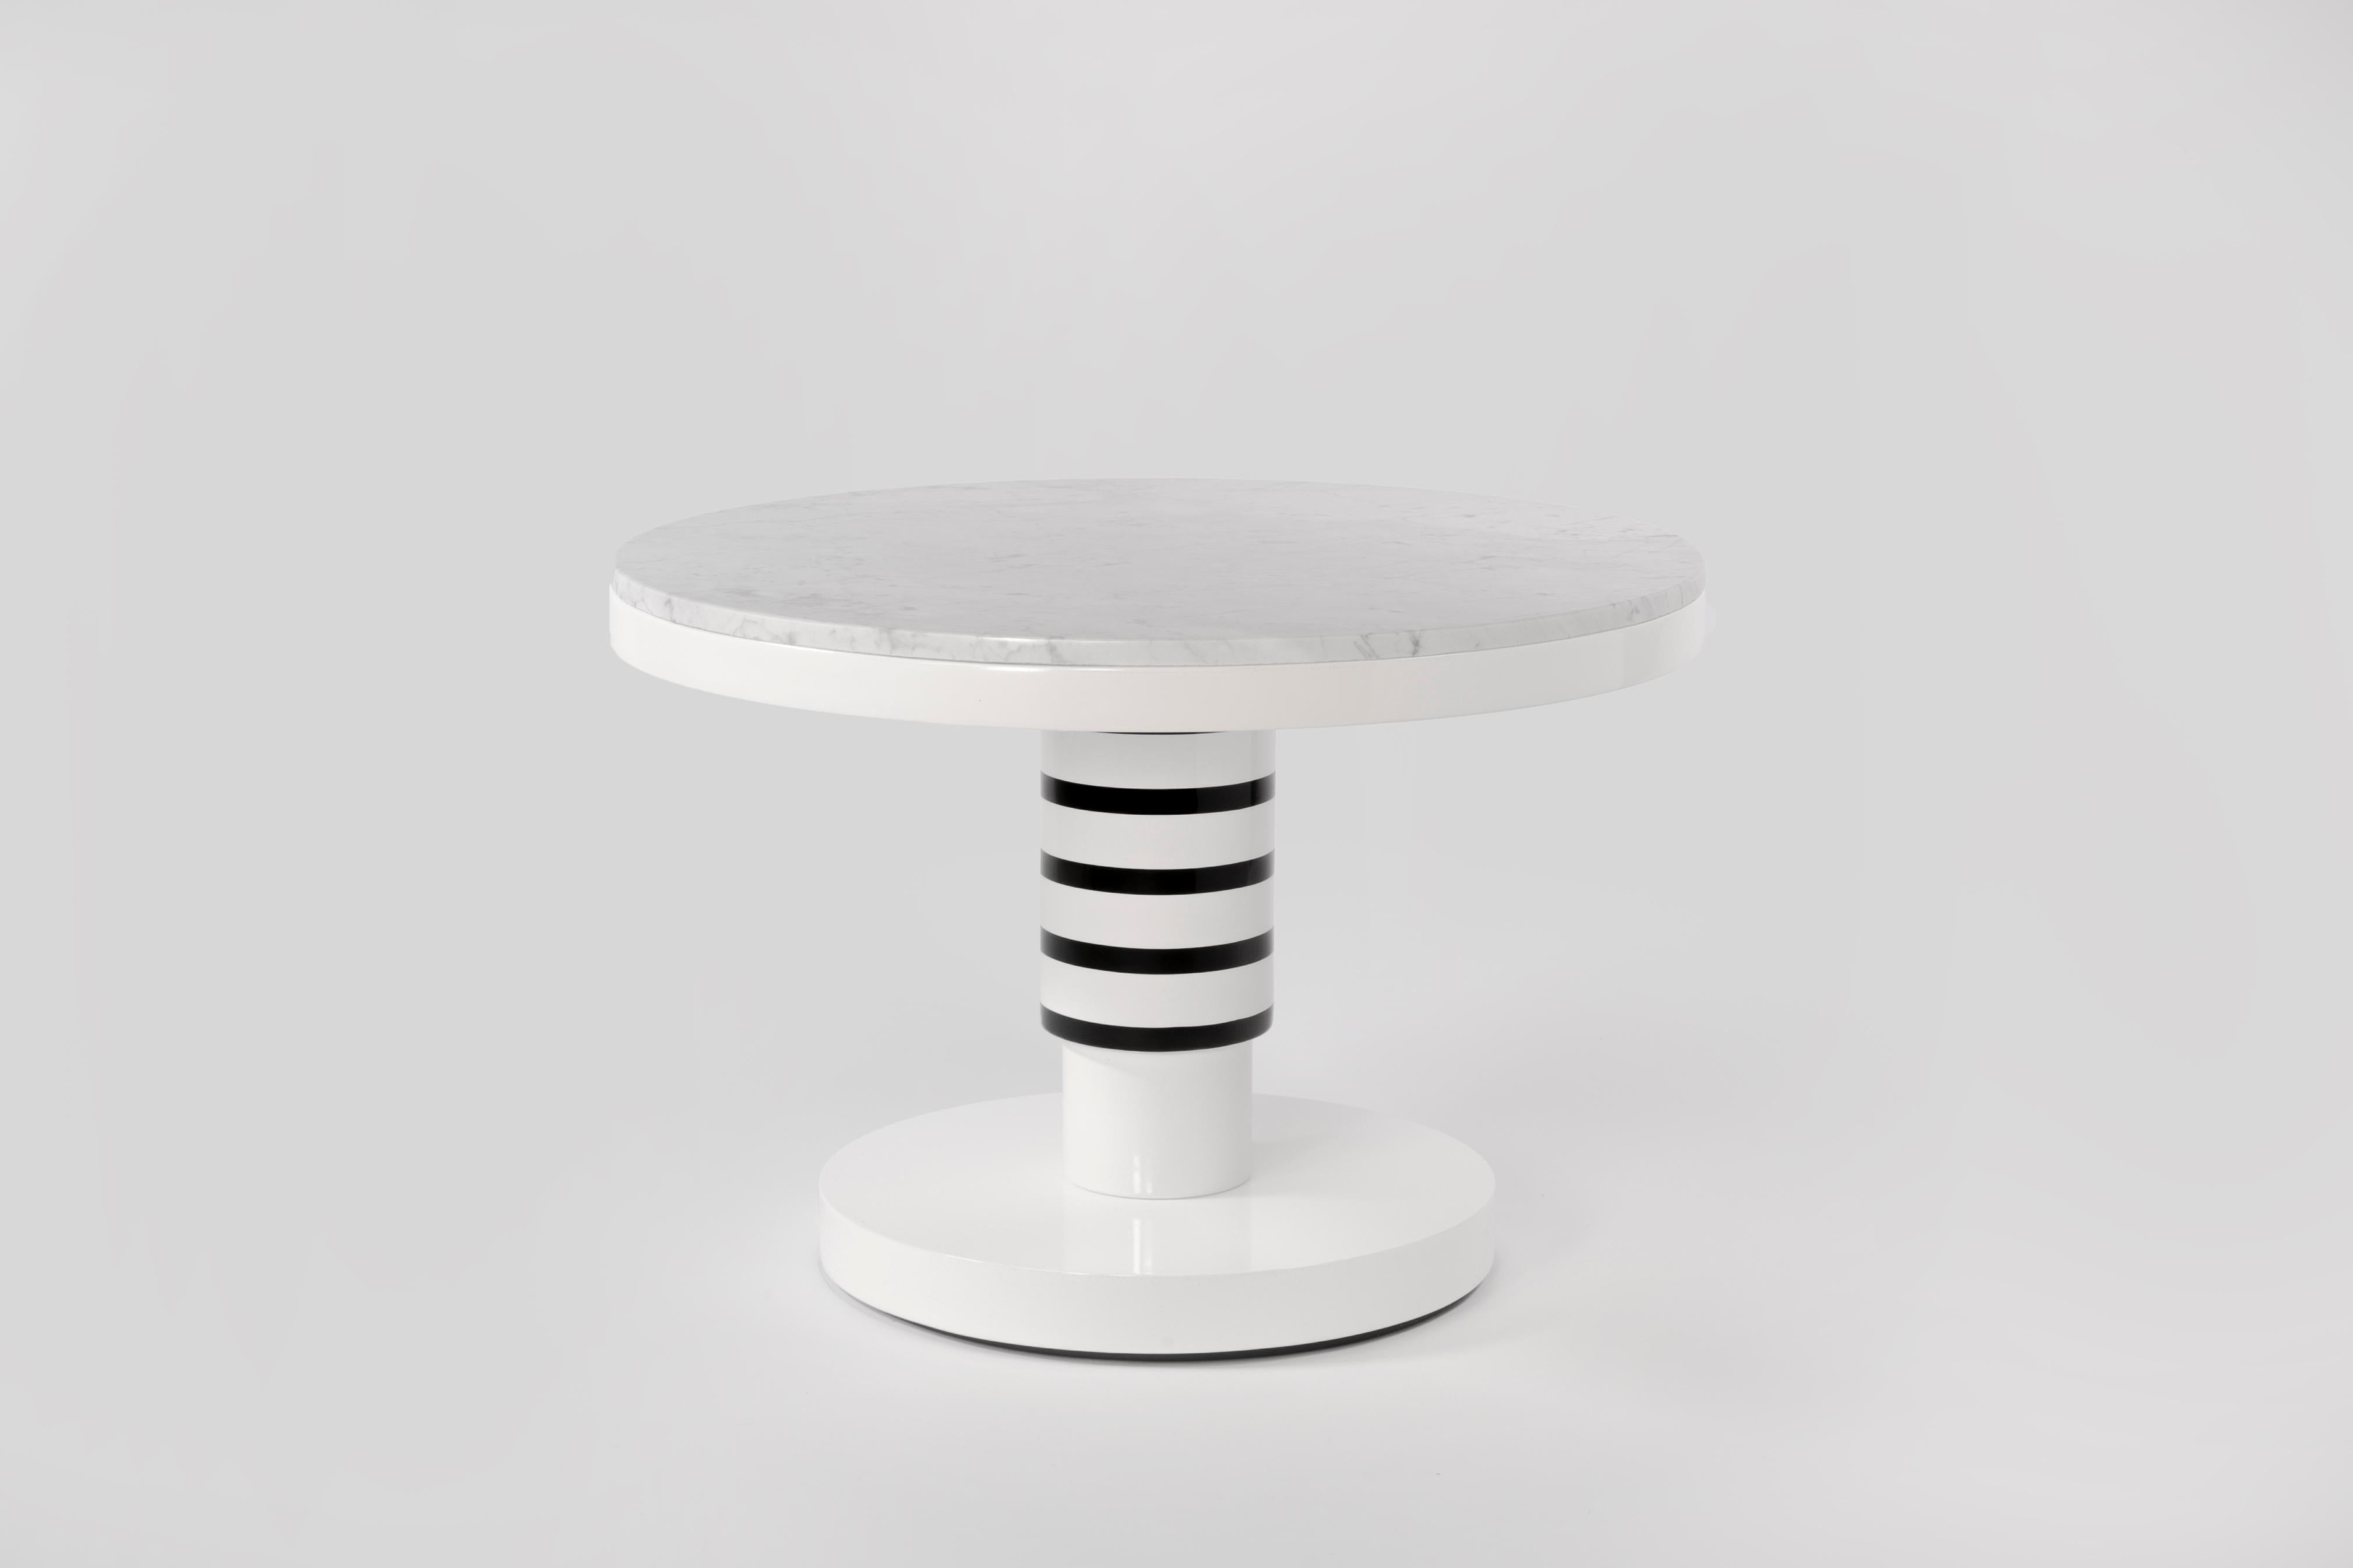 Marble and ceramic coffee table by Eric Willemart
Materials: Top: Polished Carrara marble paate embedded in a white lacquered 
 Wooden Tray
 Body: Handcrafted ceramic glazed in black, white and silver finishes
 Base: White lacquered wood on an